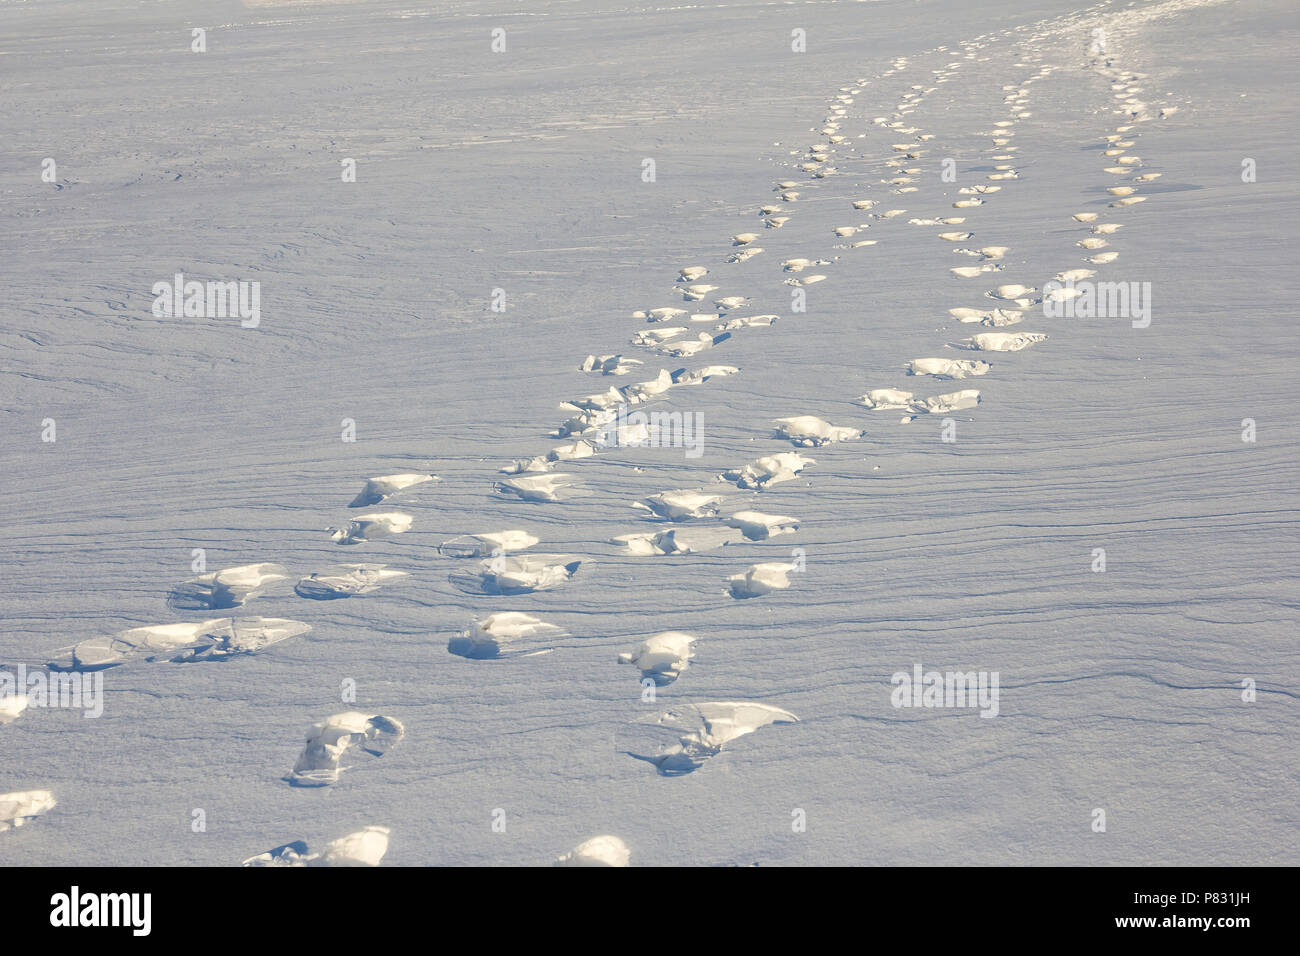 Footprints path crossing a snowy terrain, Traces on snow, background Stock Photo